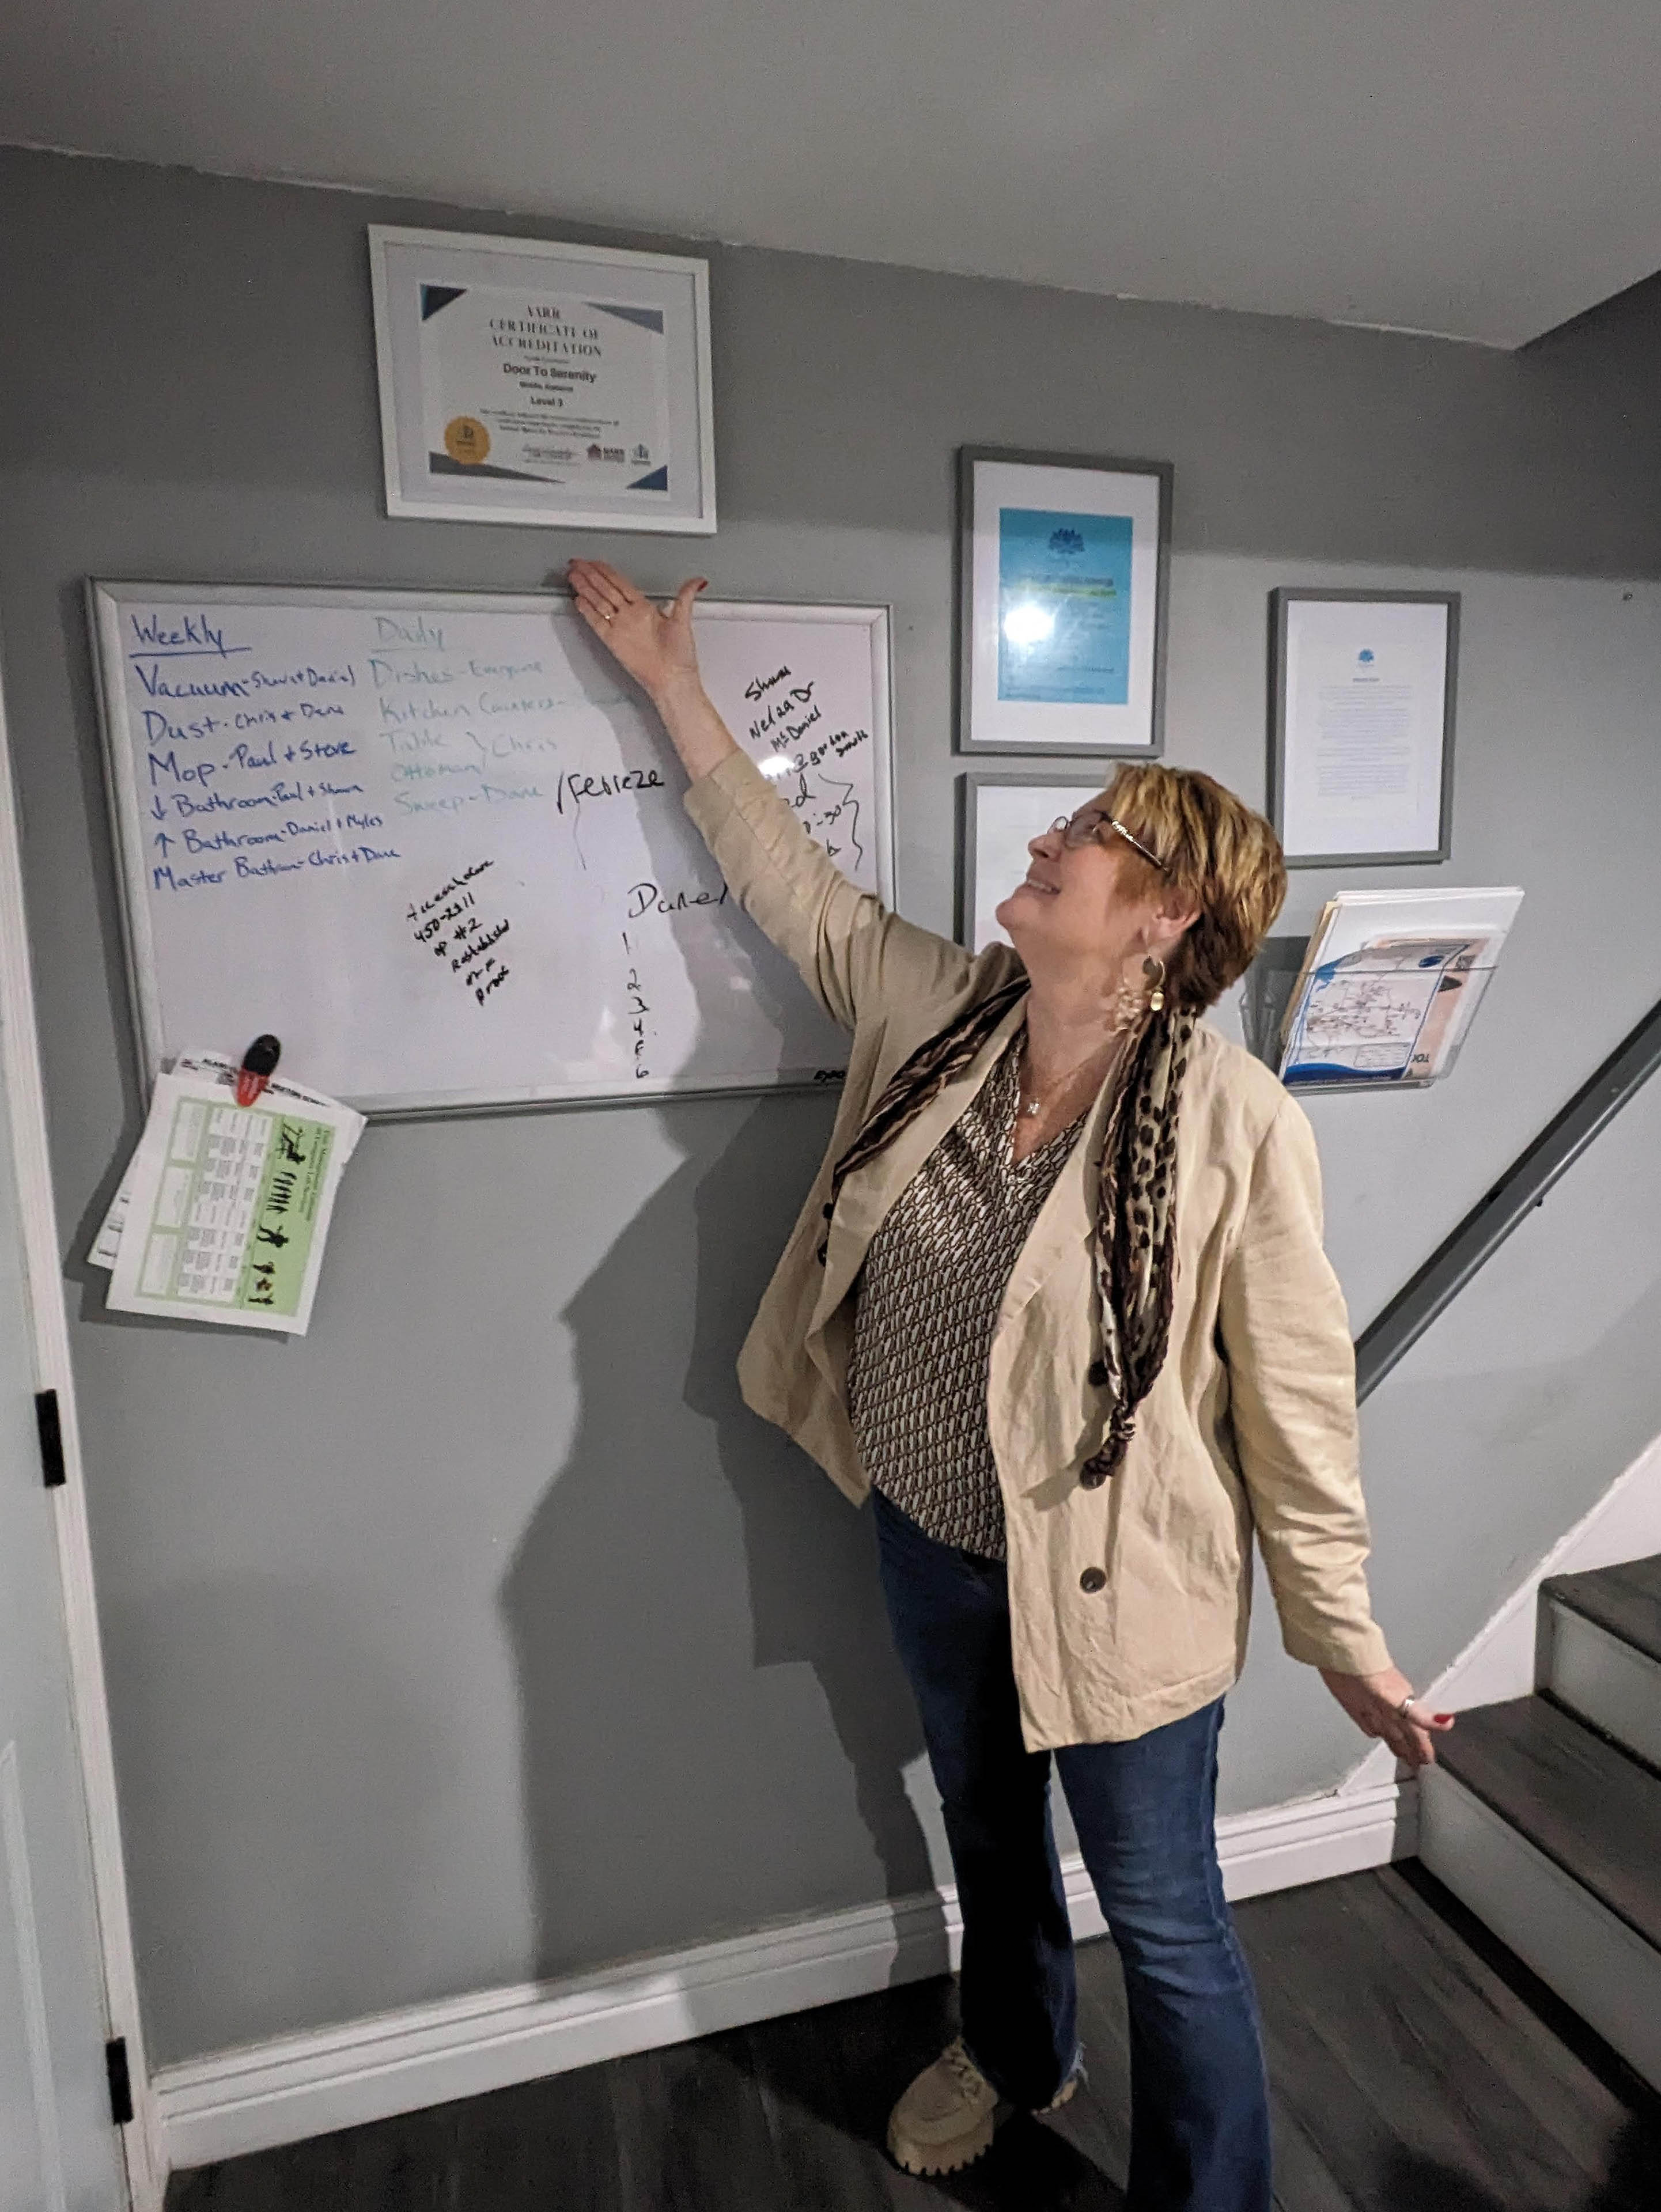 Lisa Teggart proudly points to her certification from the Alabama Alliance for Recovery Residences. The certificate hangs on a gray wall beside a staircase.